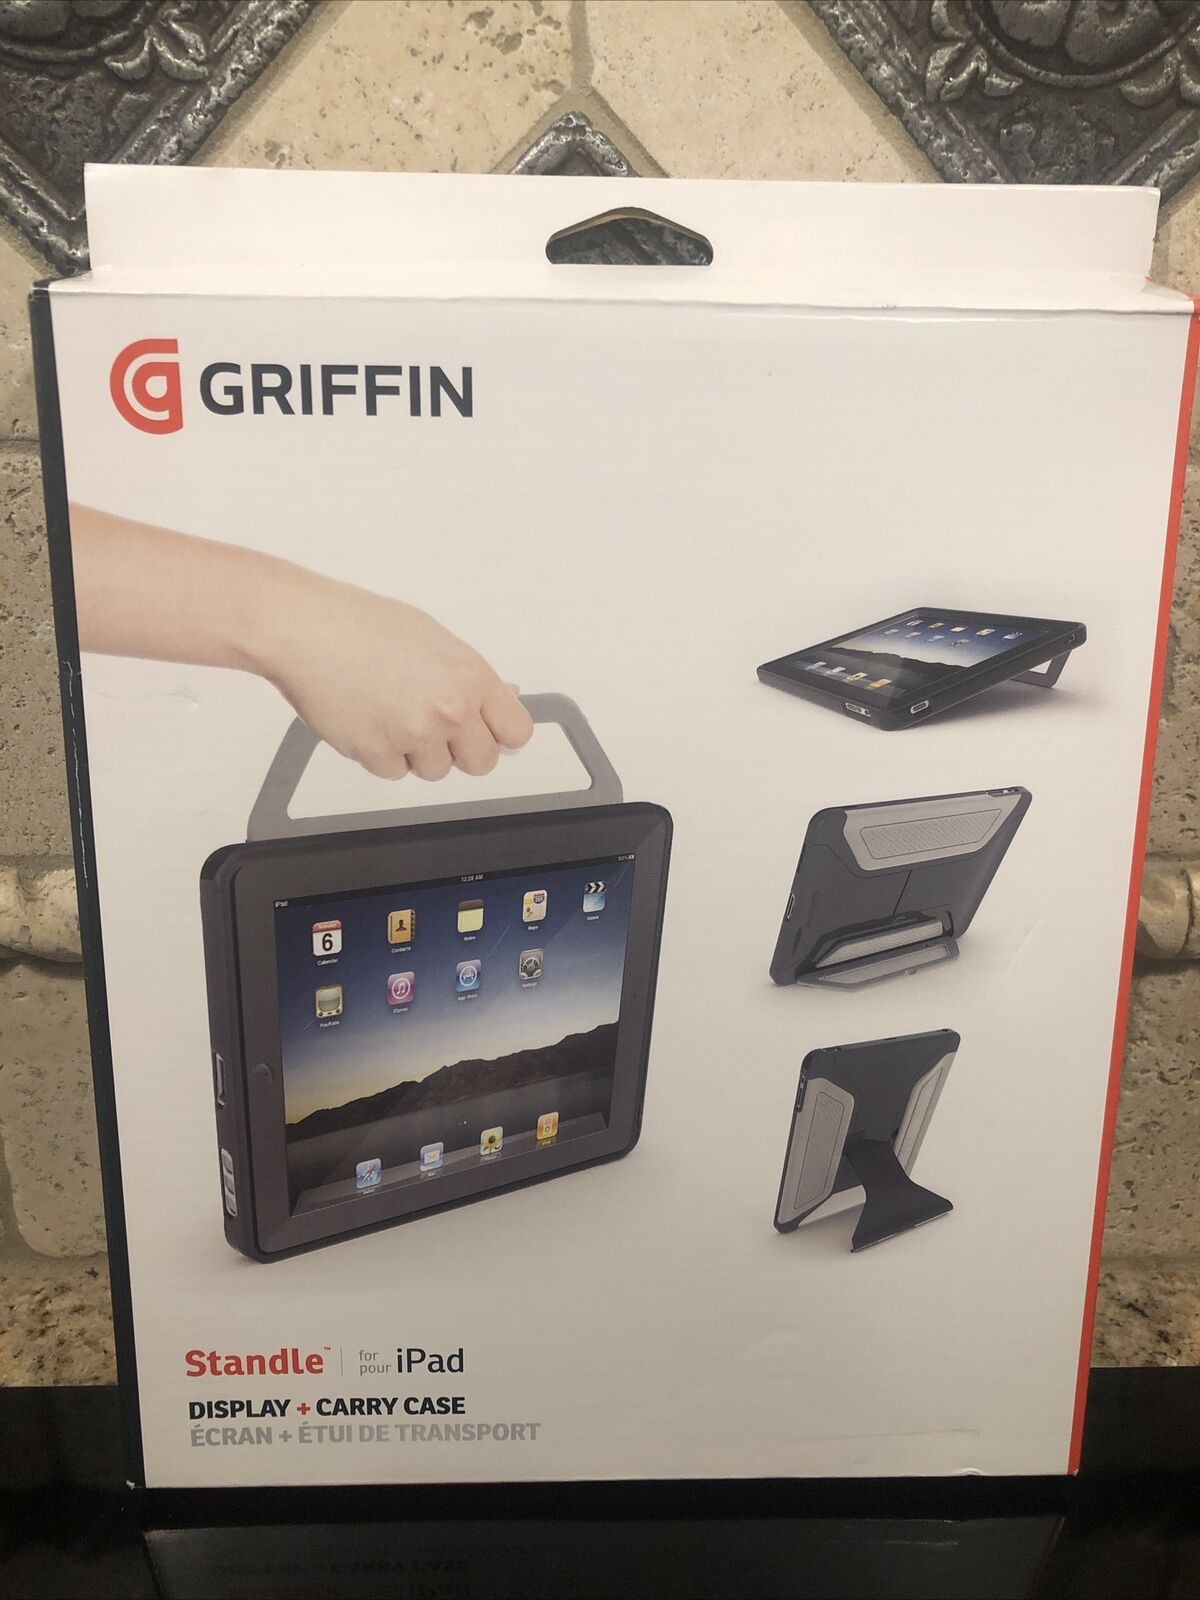 Griffin Standle Black Versatile Standing Display Carry Case for iPad - GB01685